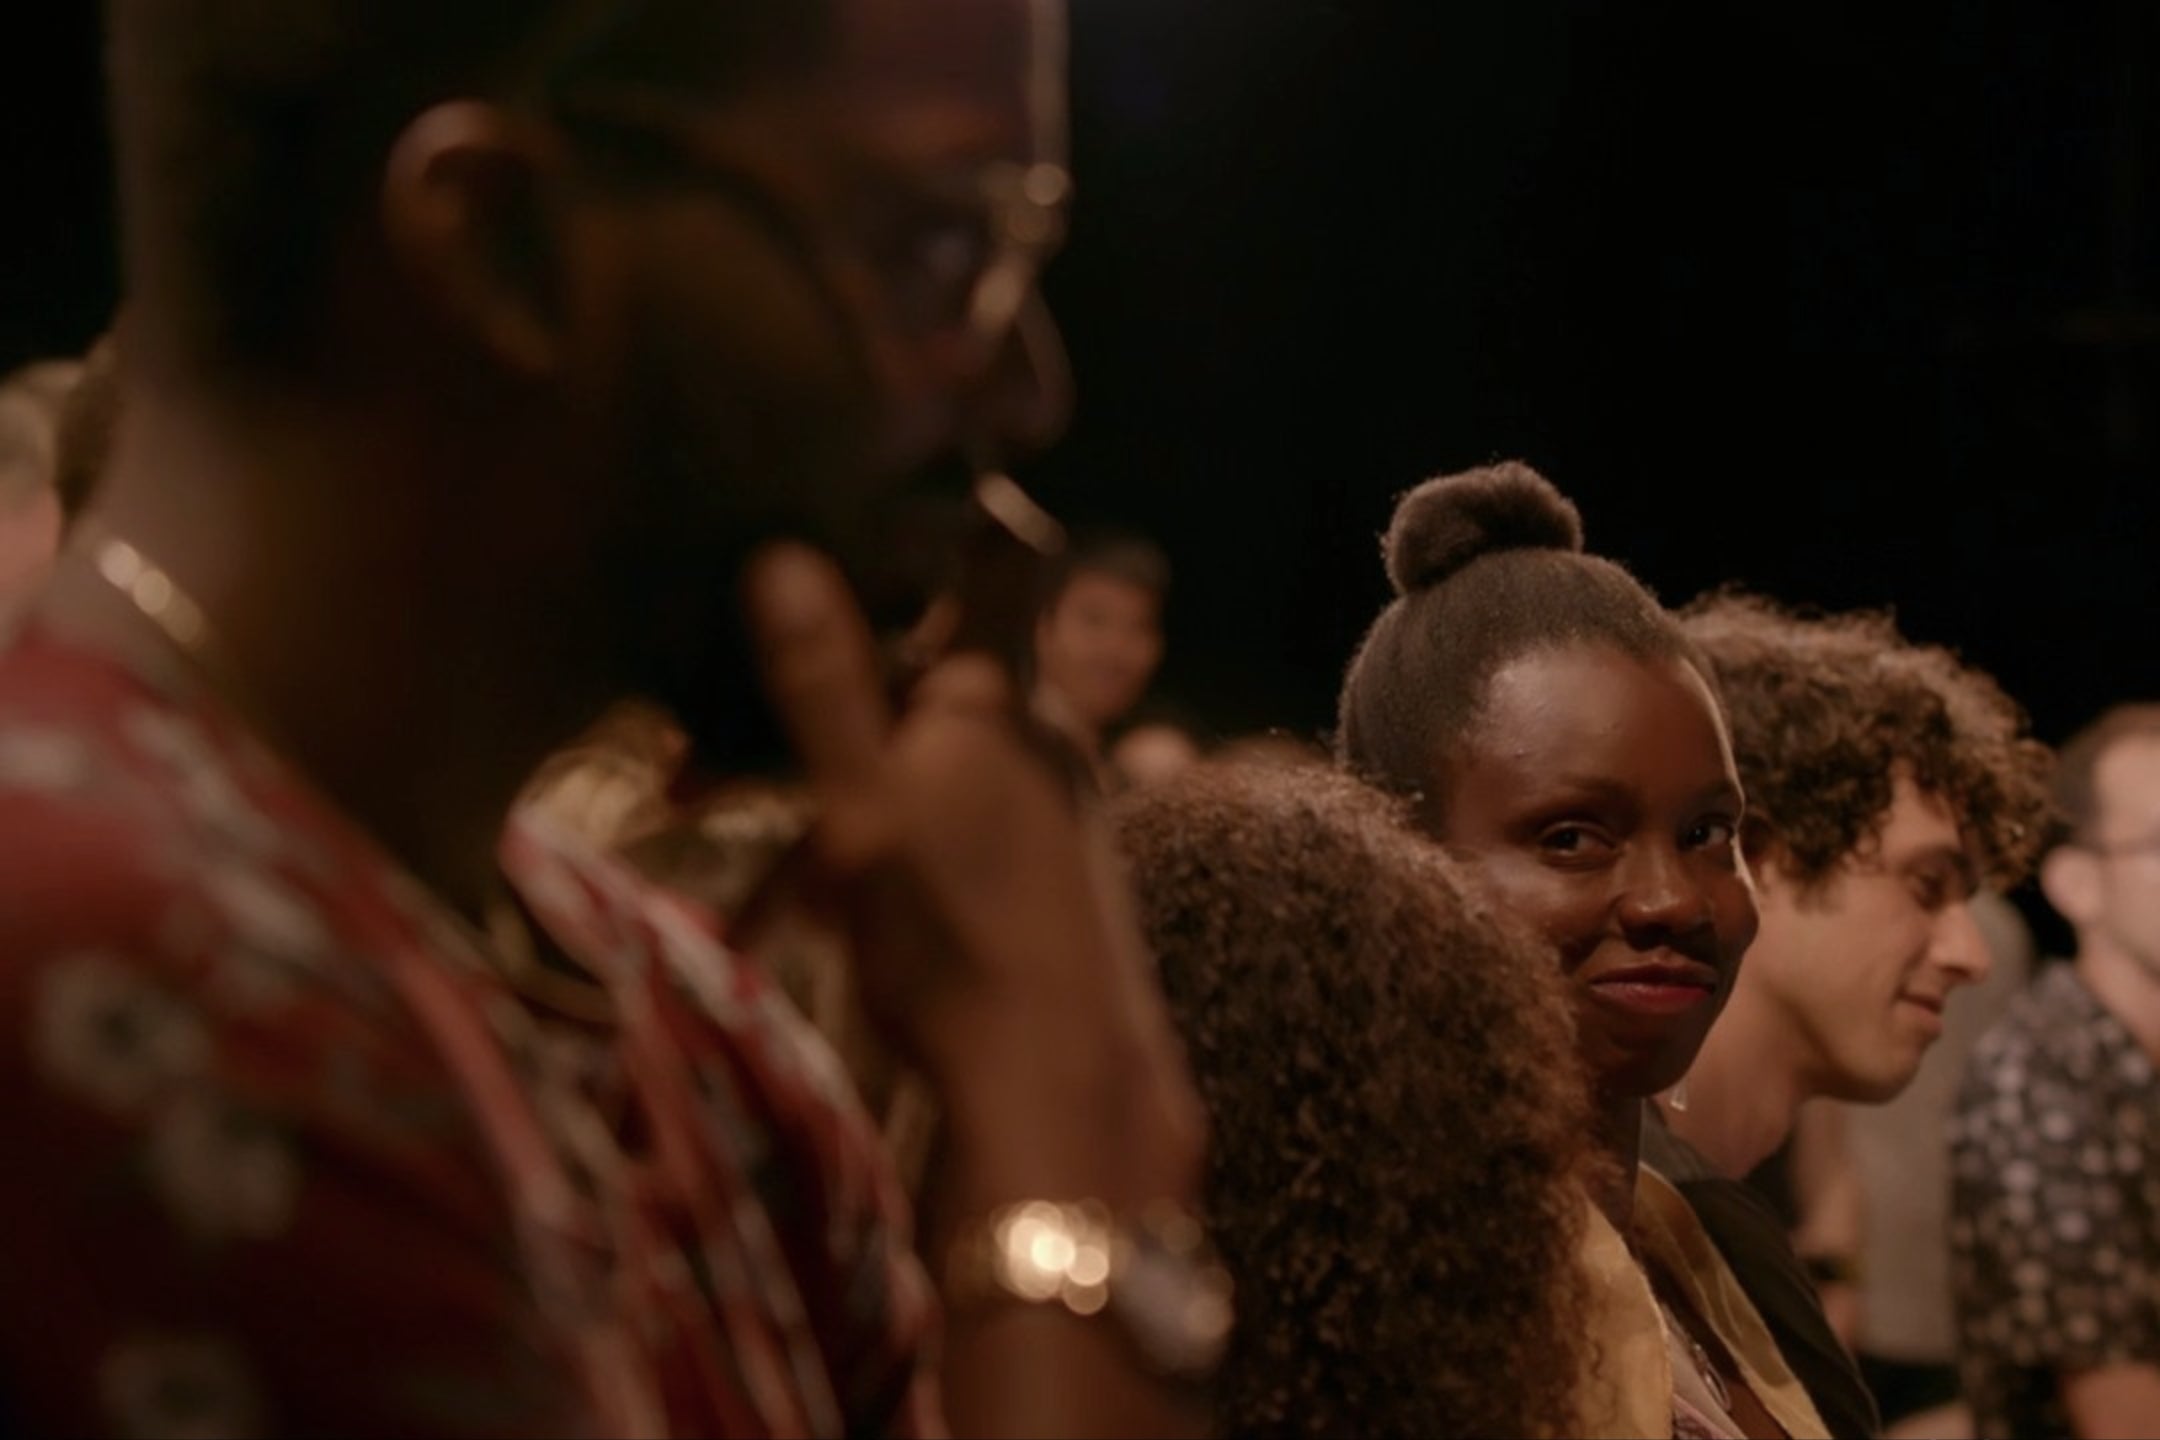 Adepero Oduye, stands in a theater audience, smiling at another person in the foreground.